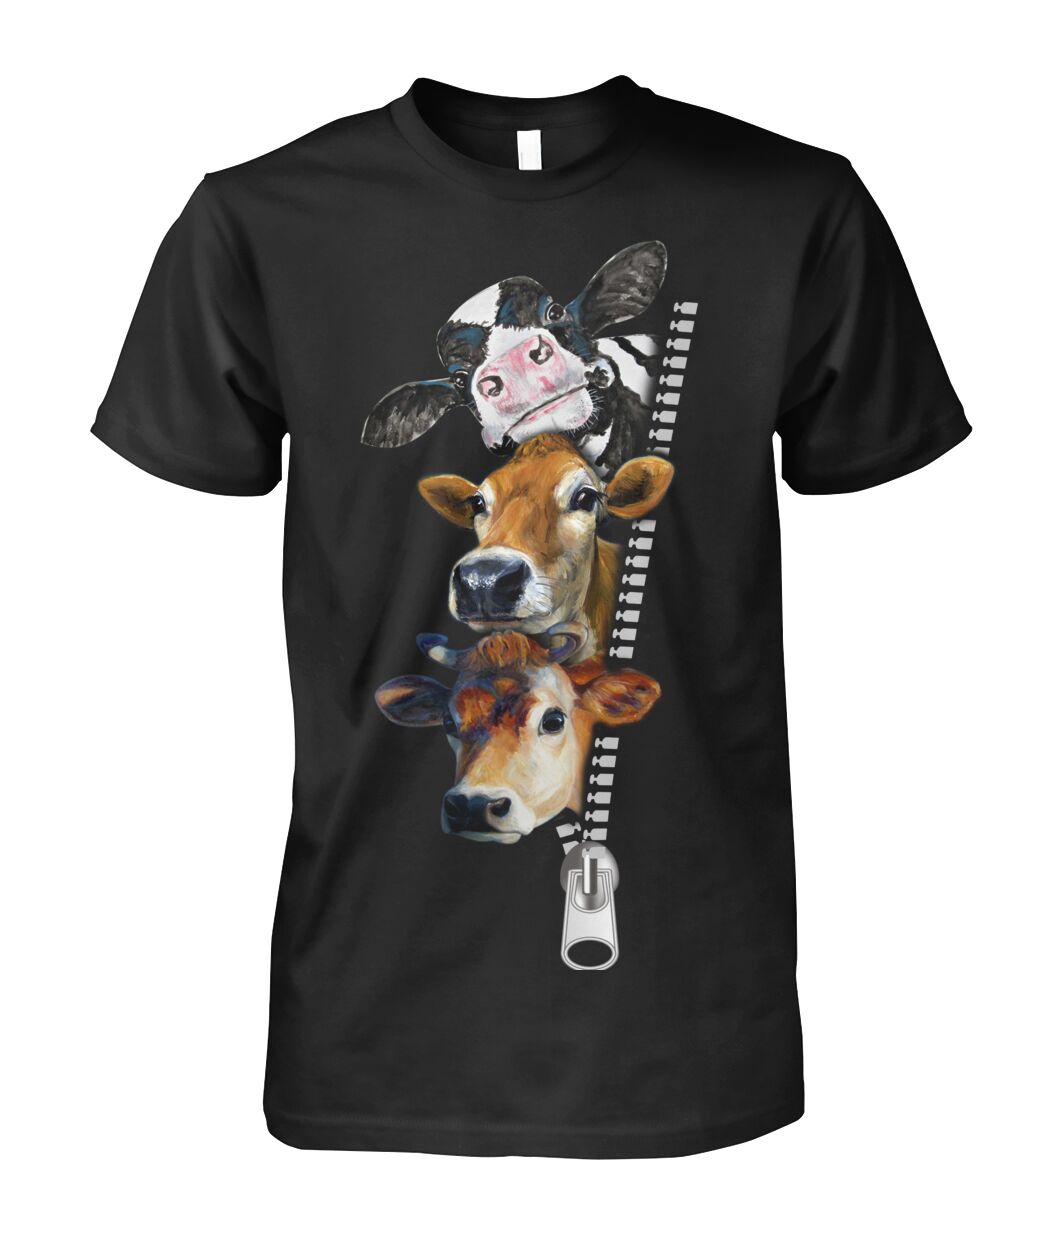 Funny cow  - Men's and Women's t-shirt , Vneck, Hoodies - myfunfarm - clothing acceessories shoes for cow lovers, pig, horse, cat, sheep, dog, chicken, goat farmer